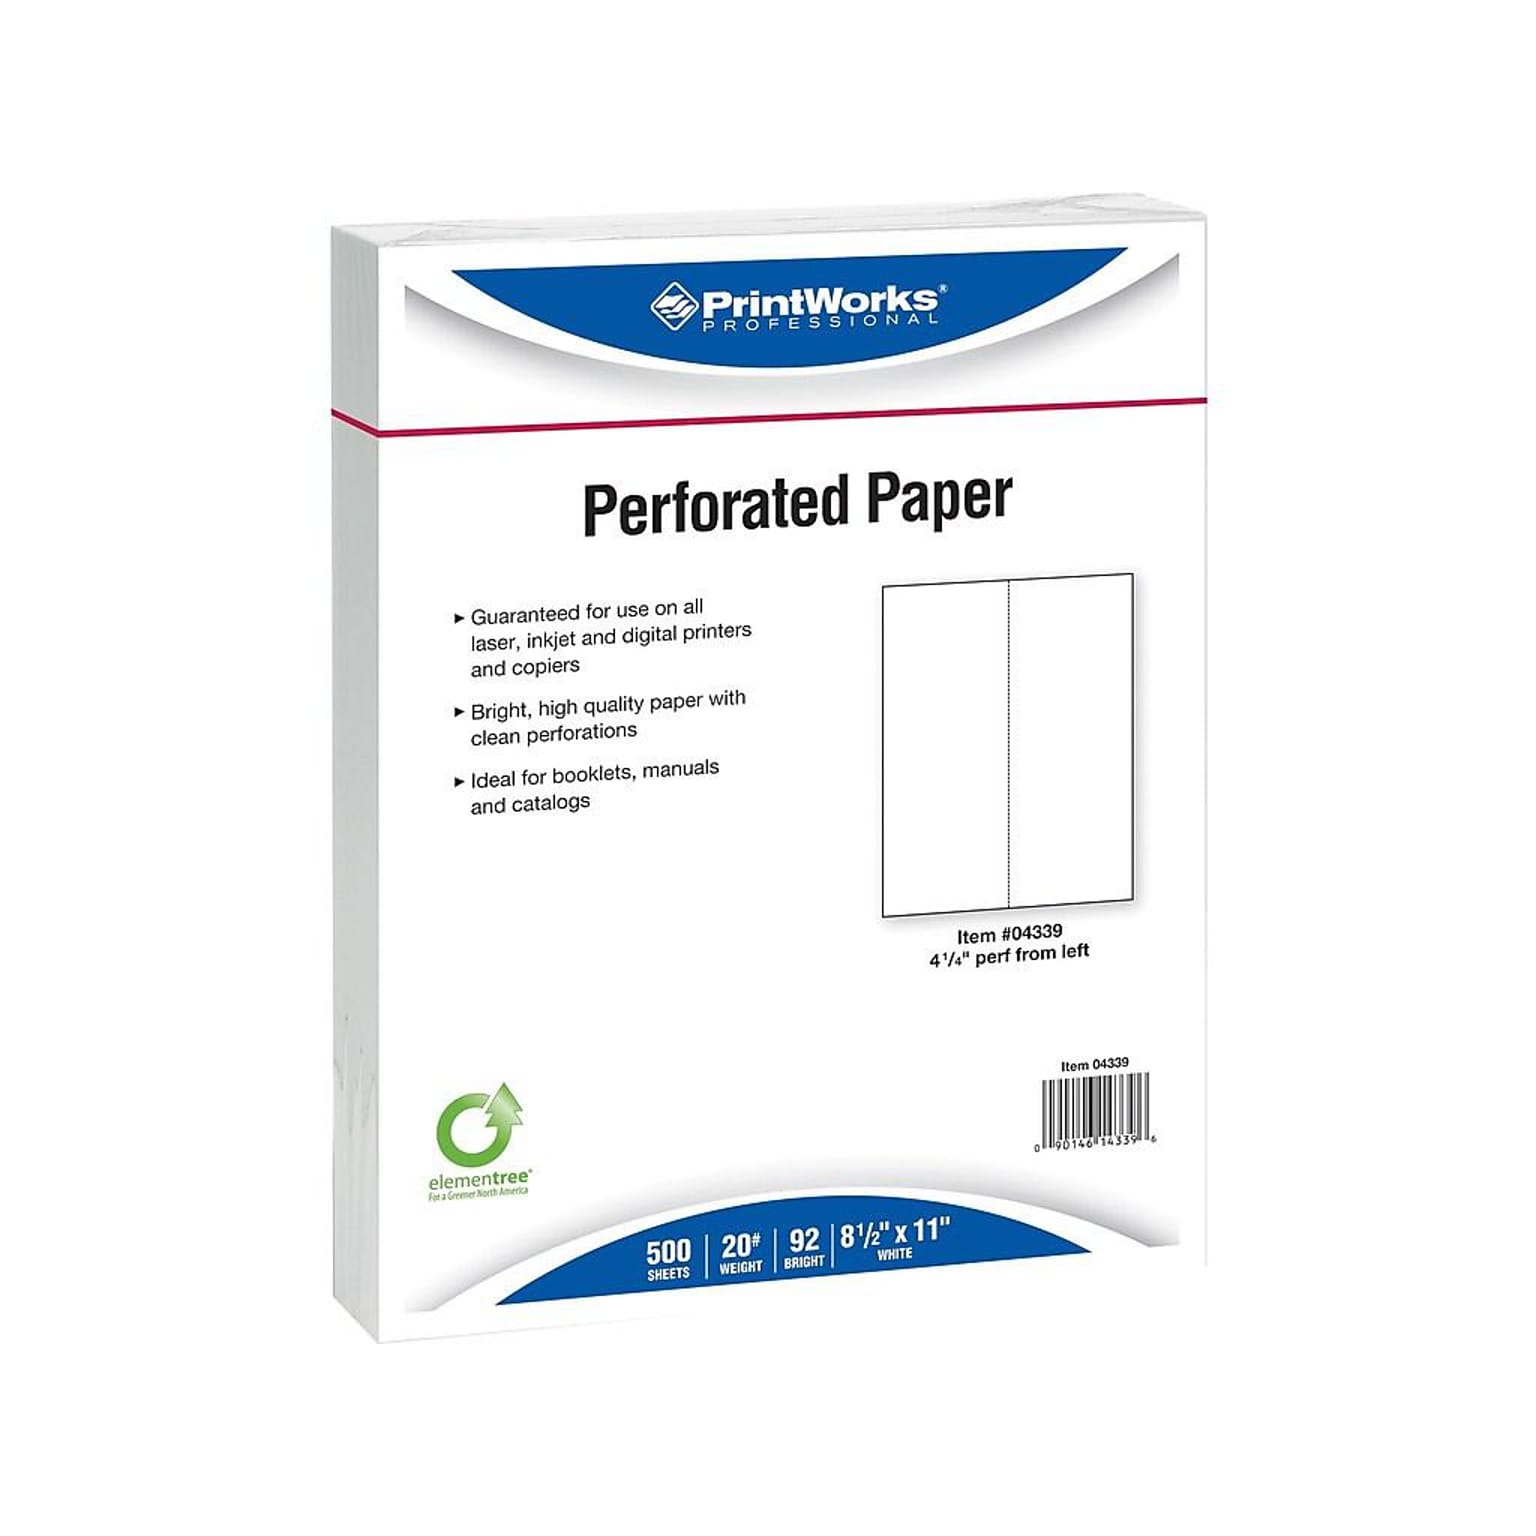 Printworks® Professional 8.5 x 11 Perforated Paper, 20 lbs., 92 Brightness, 2500 Sheets/Carton (04339)